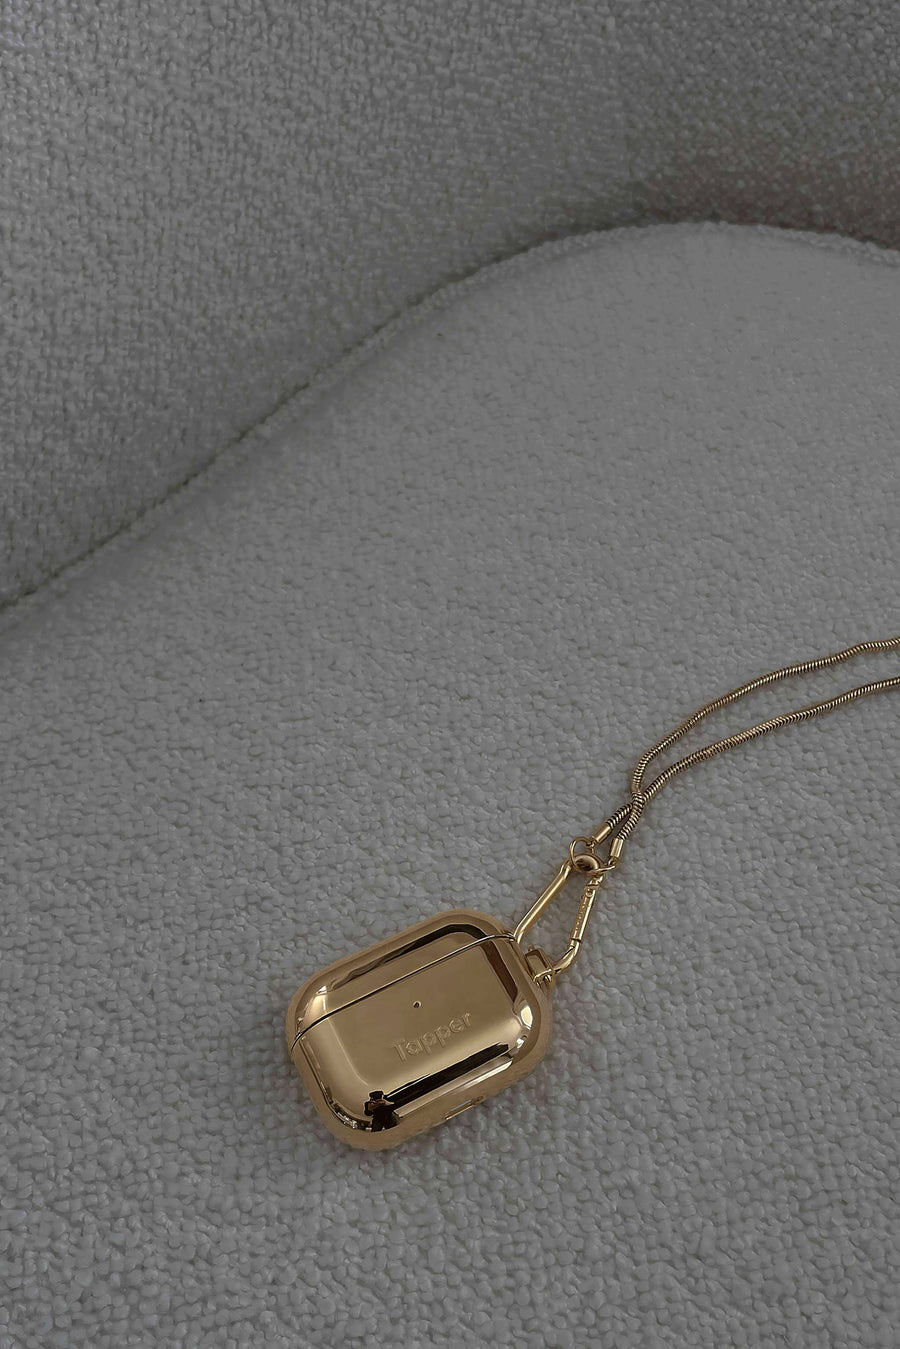 Tapper's real 18K gold plated original metal neck case jewelry protects your Apple AirPods Pro. Luxurious, elevated & accessible AirPods Pro jewellery plated in precious metals. Worried about losing your AirPods Pro? Detachable snake chain and carabiner for convenient and hassle-free safekeeping around your neck. The next must-have AirPods Pro accessory crafted for ultimate luxury. Compatible with AirPods Pro. Designed in Sweden by Tapper. Free Express Shipping at gettapper.com